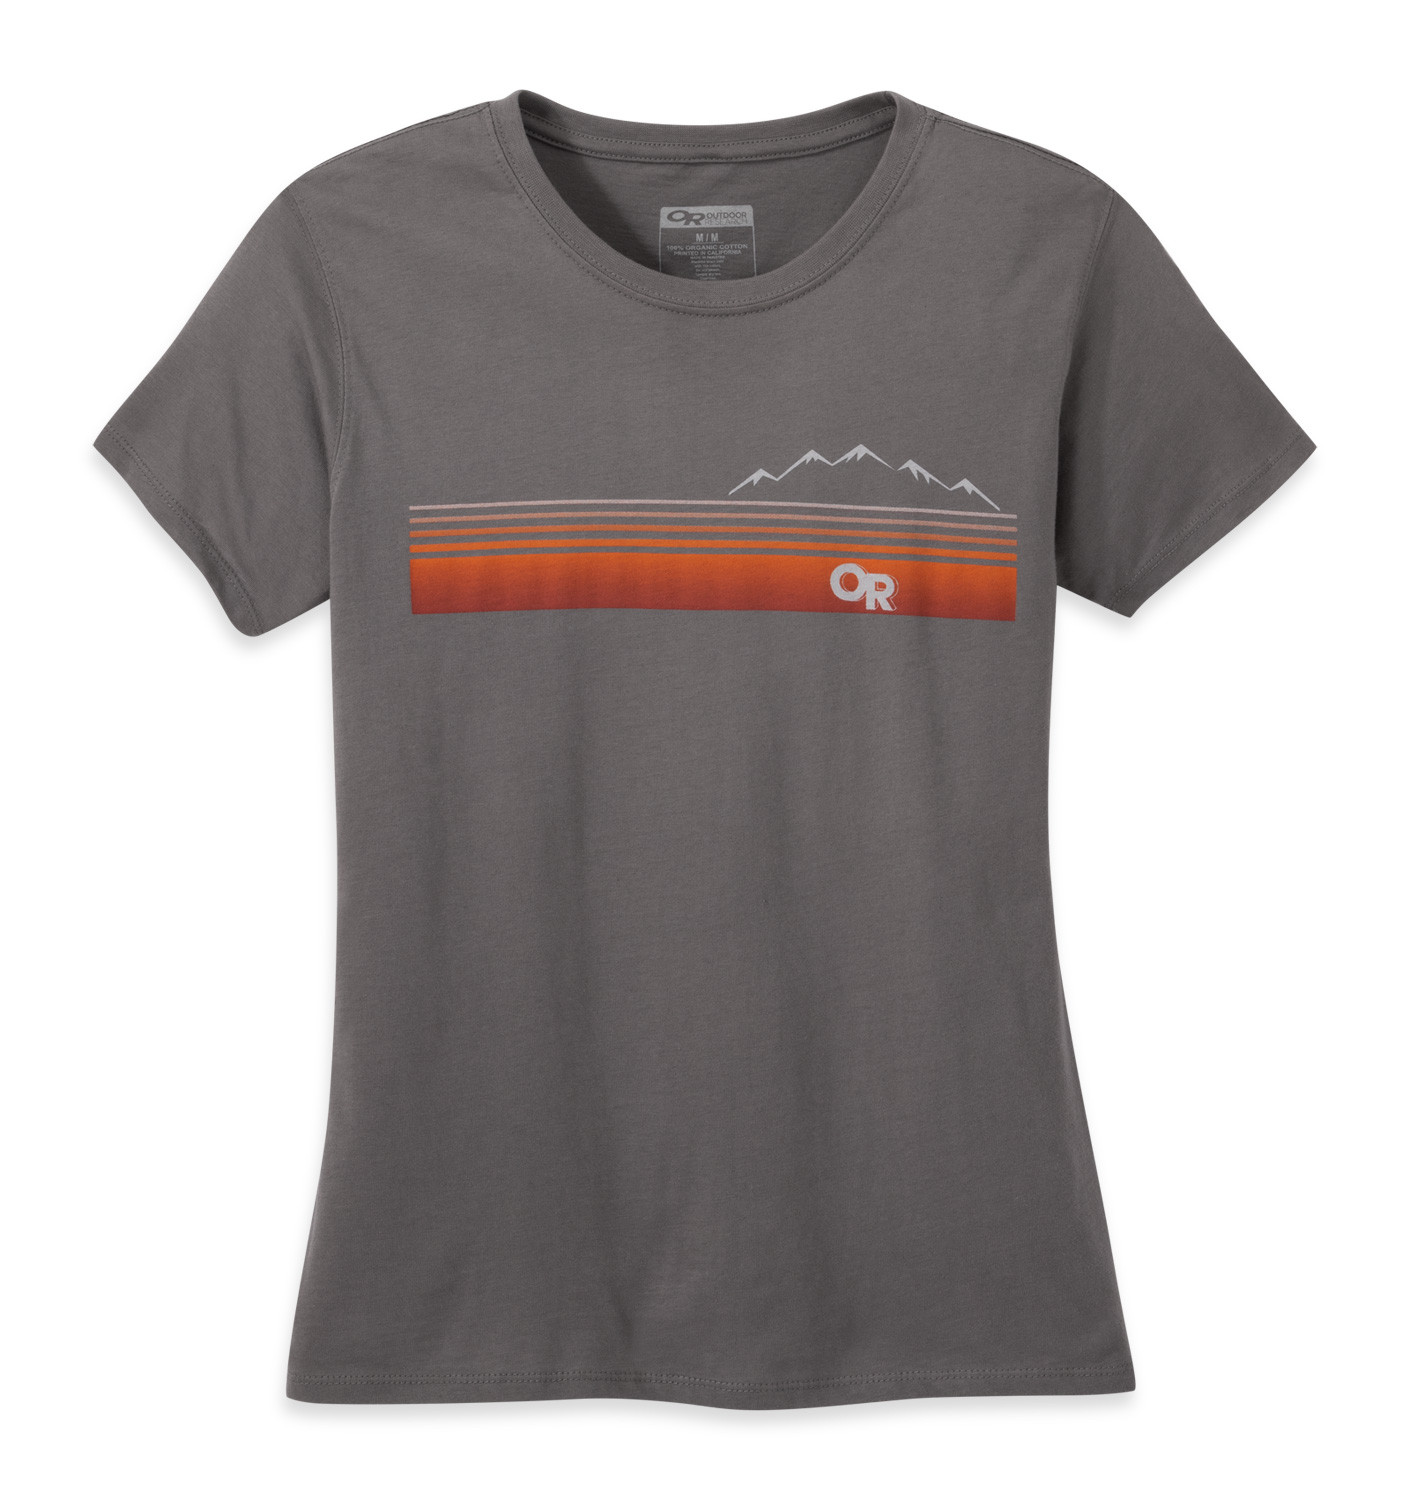 Outdoor Research Women's Ally S/S Tee